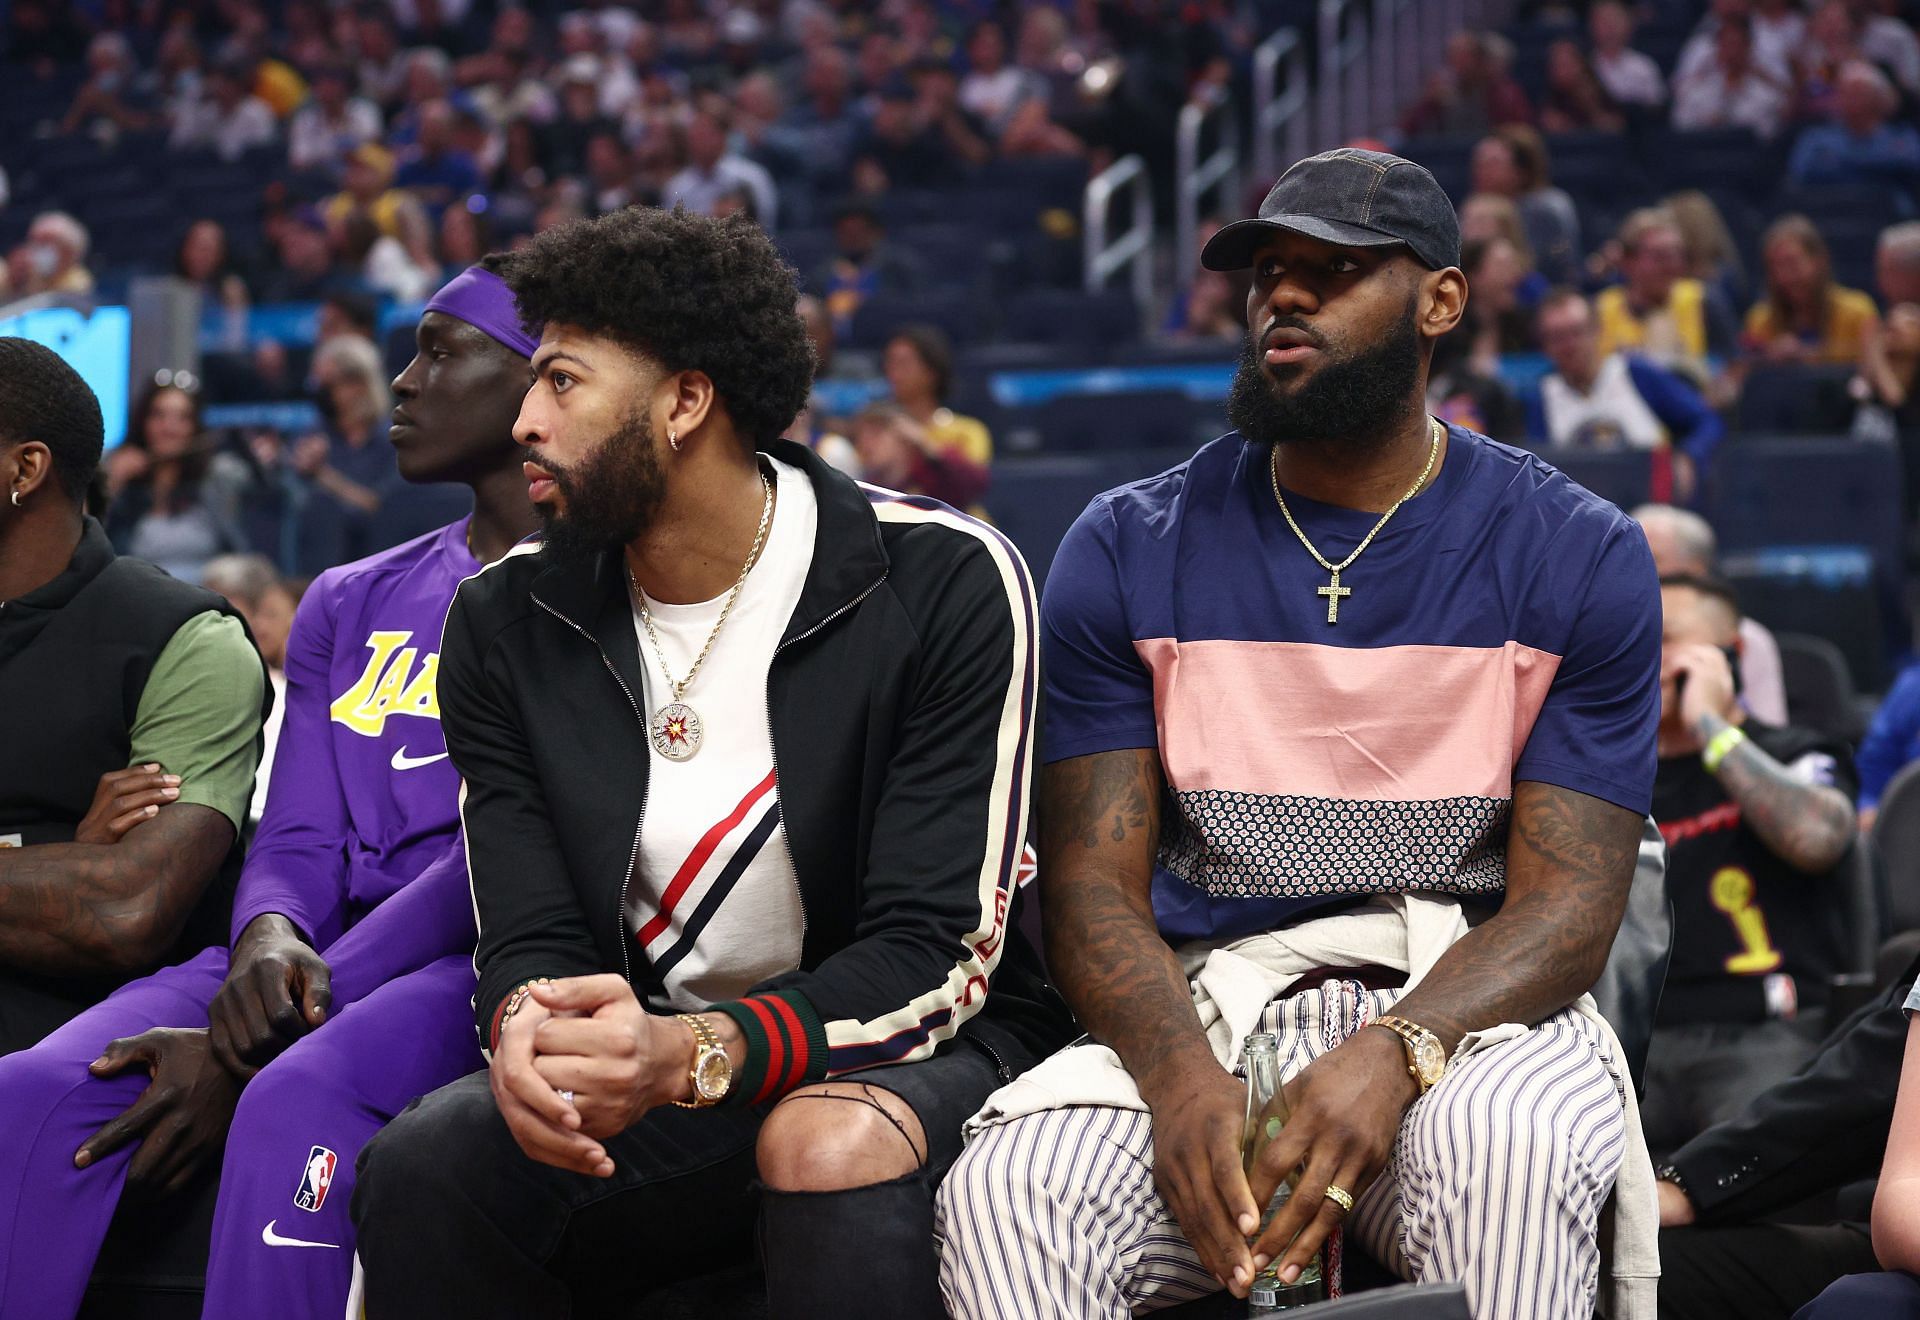 Injured stars Anthony Davis (left) and LeBron James of the LA Lakers sit on the bench.